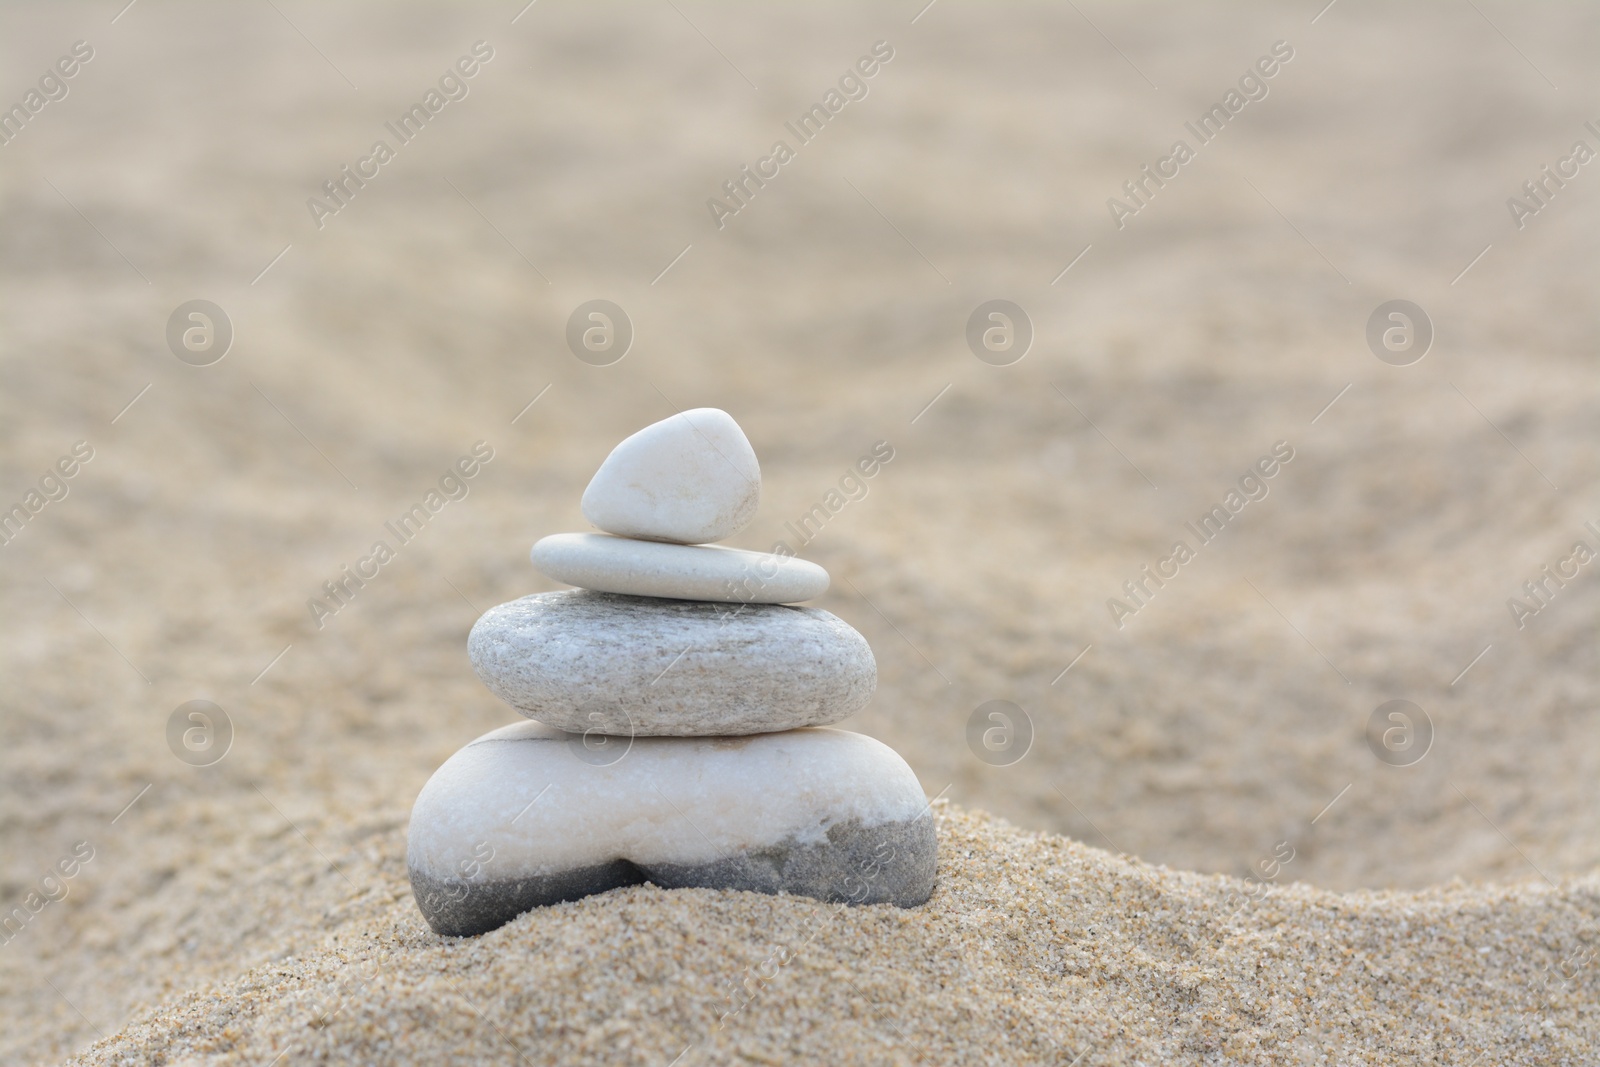 Photo of Stack of stones on sandy beach, space for text